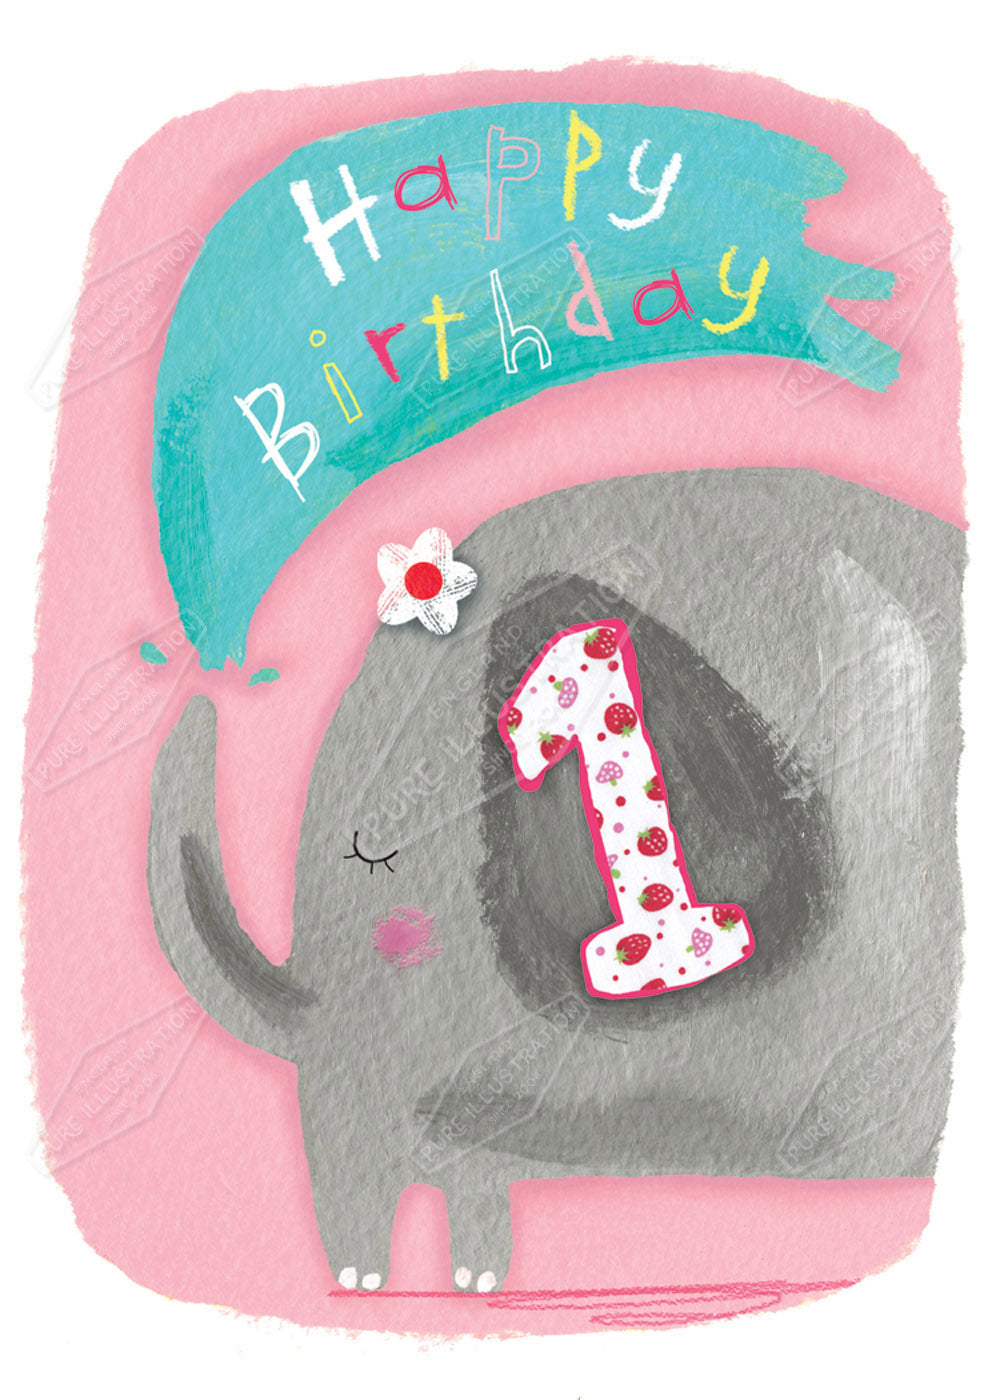 Birthday Elephant Age Card Greeting Card Design by Cory Reid for Pure art Licensing Agency & Surface Design Studio